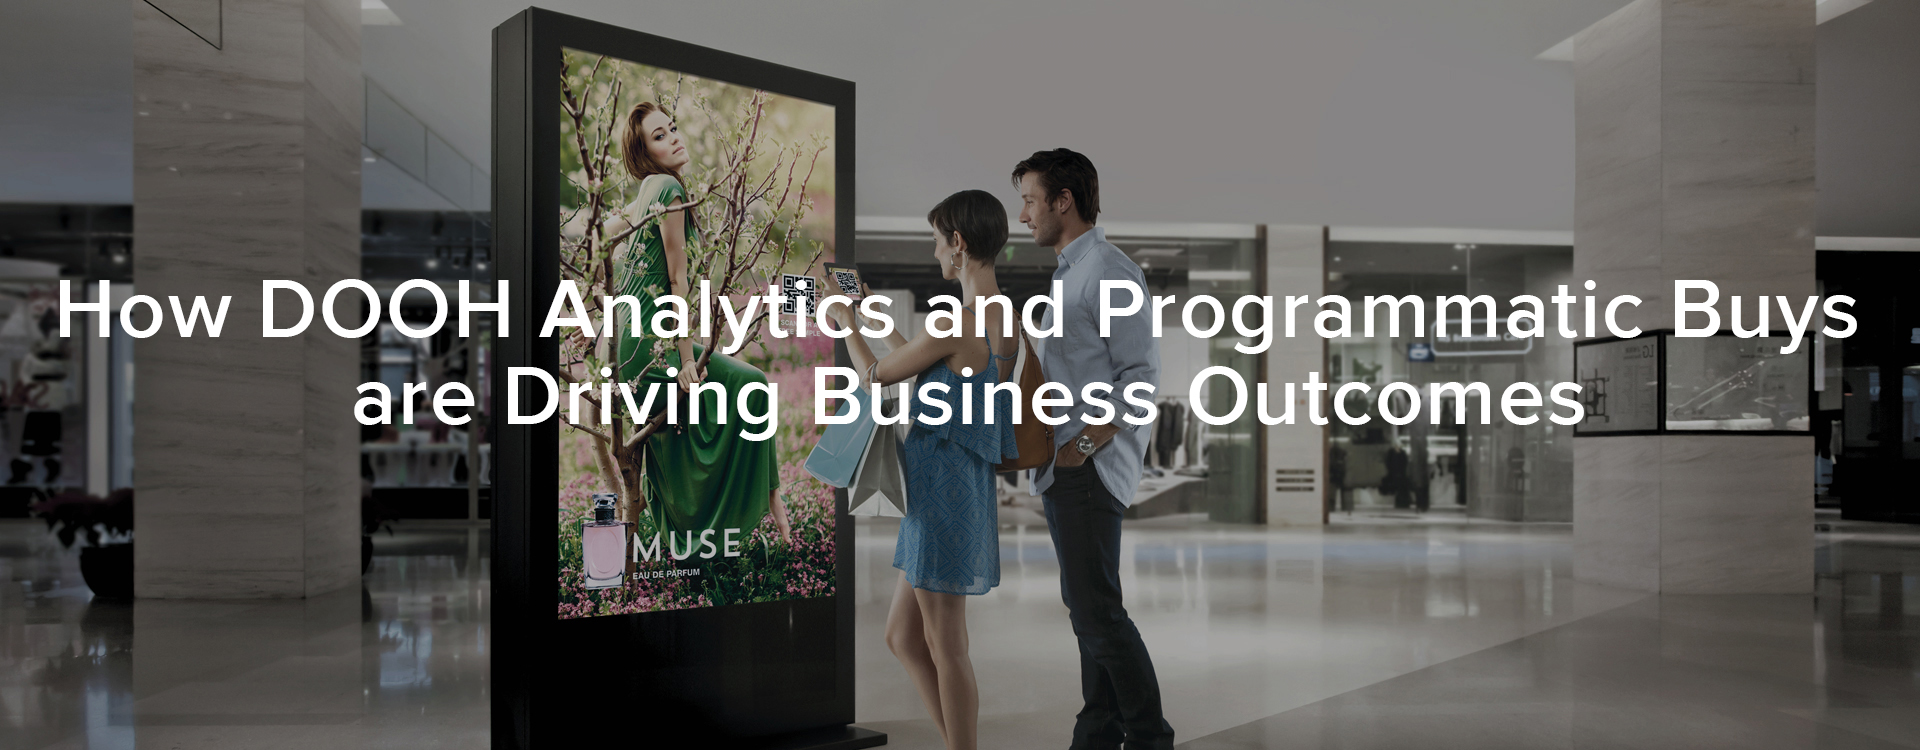 how DOOH analytics and programmatic buys are driving business qutcomes